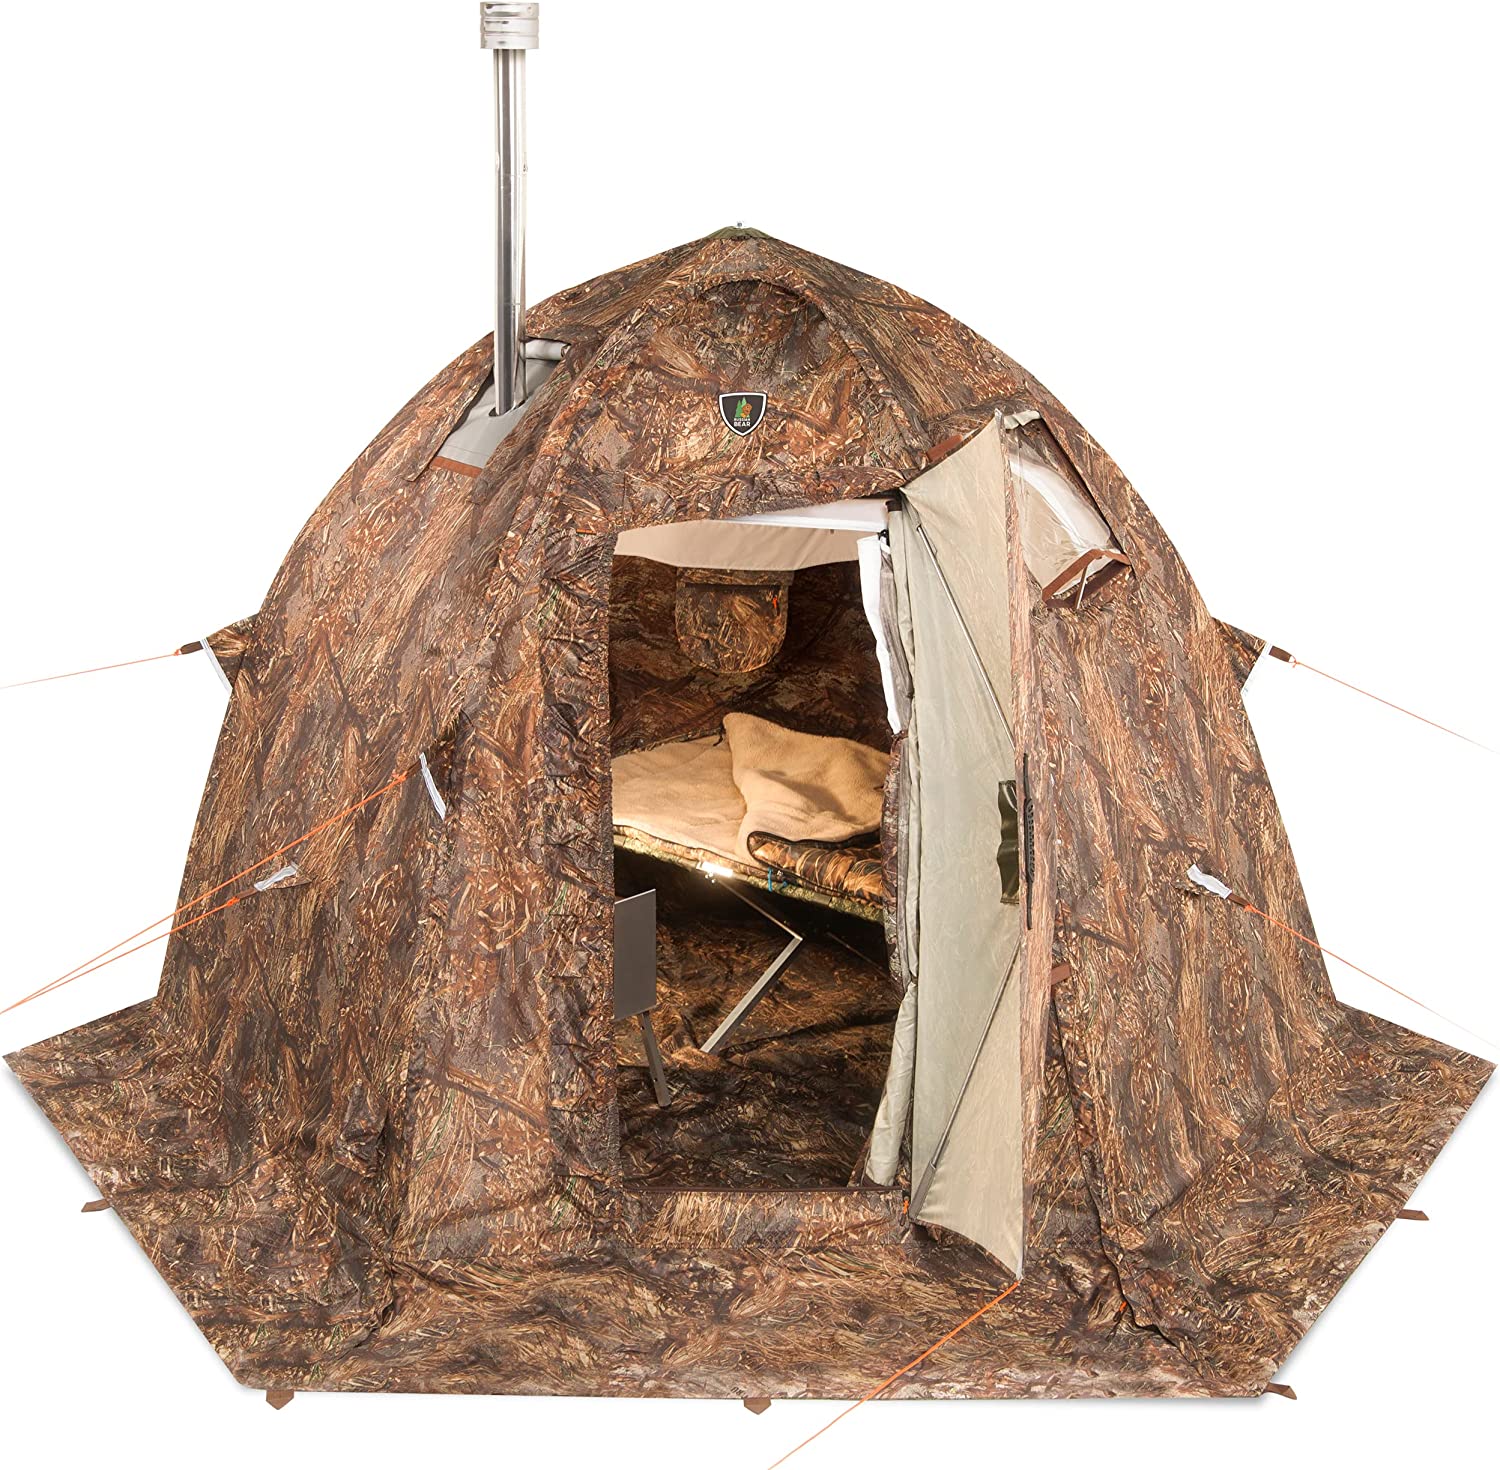 RBM Outdoors - All-Season Tent with Stove Jack "UP-2-mini". Best tent for 1-3 person - Big Horn Golfer